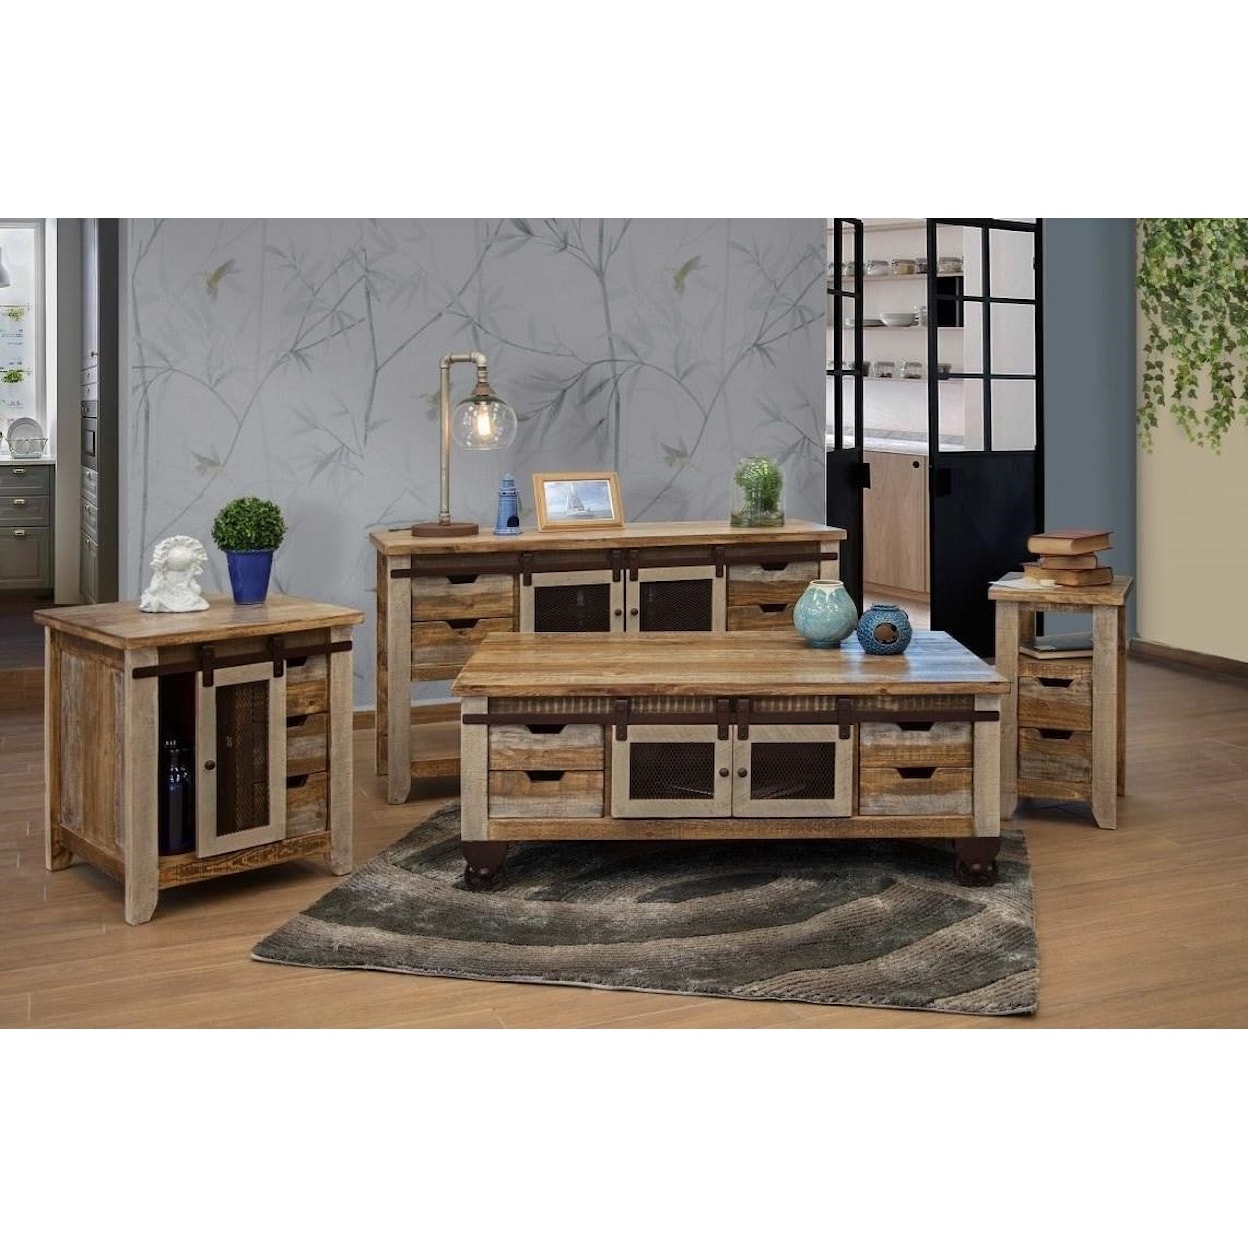 International Furniture Direct 900 Antique Sofa Table with 2 Doors and 4 Drawers